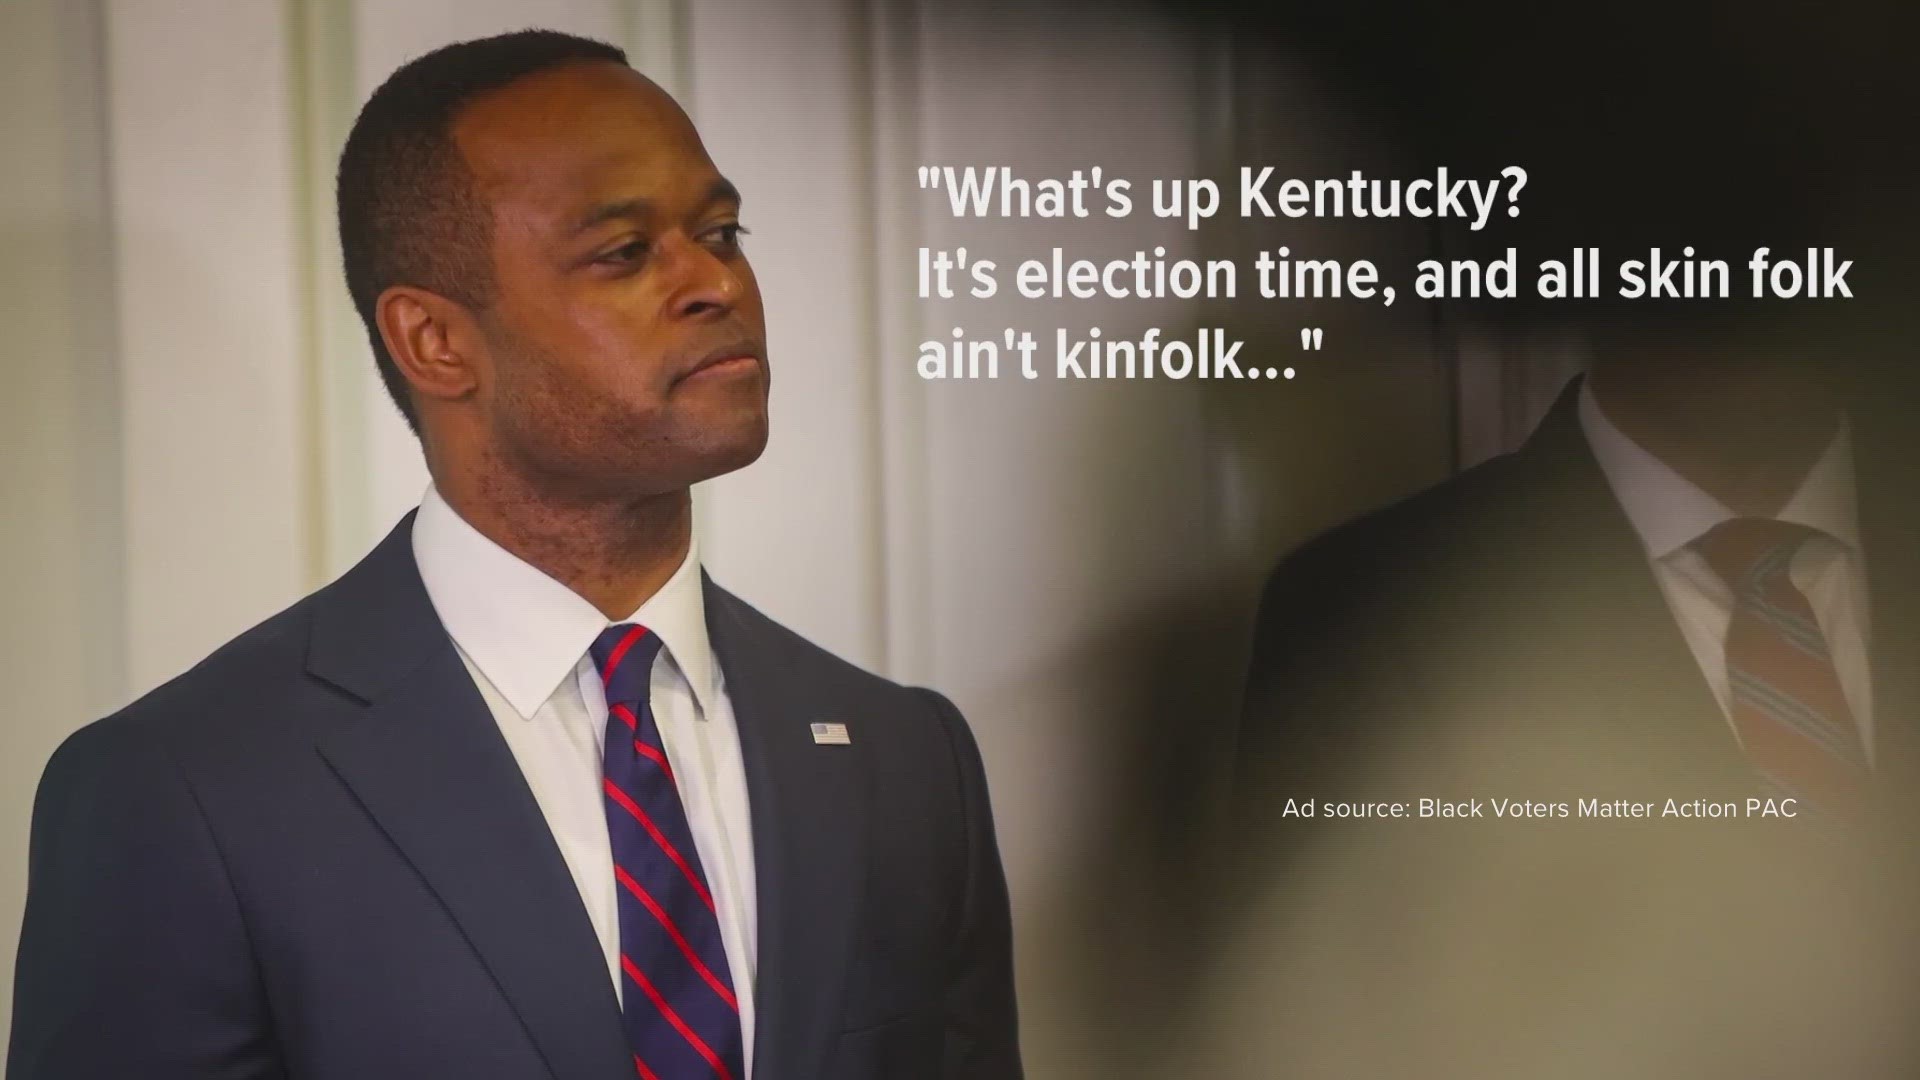 The Black Voters Matter action PAC took direct aim at Kentucky's Attorney General just days away ahead of the election for the state's next governor.